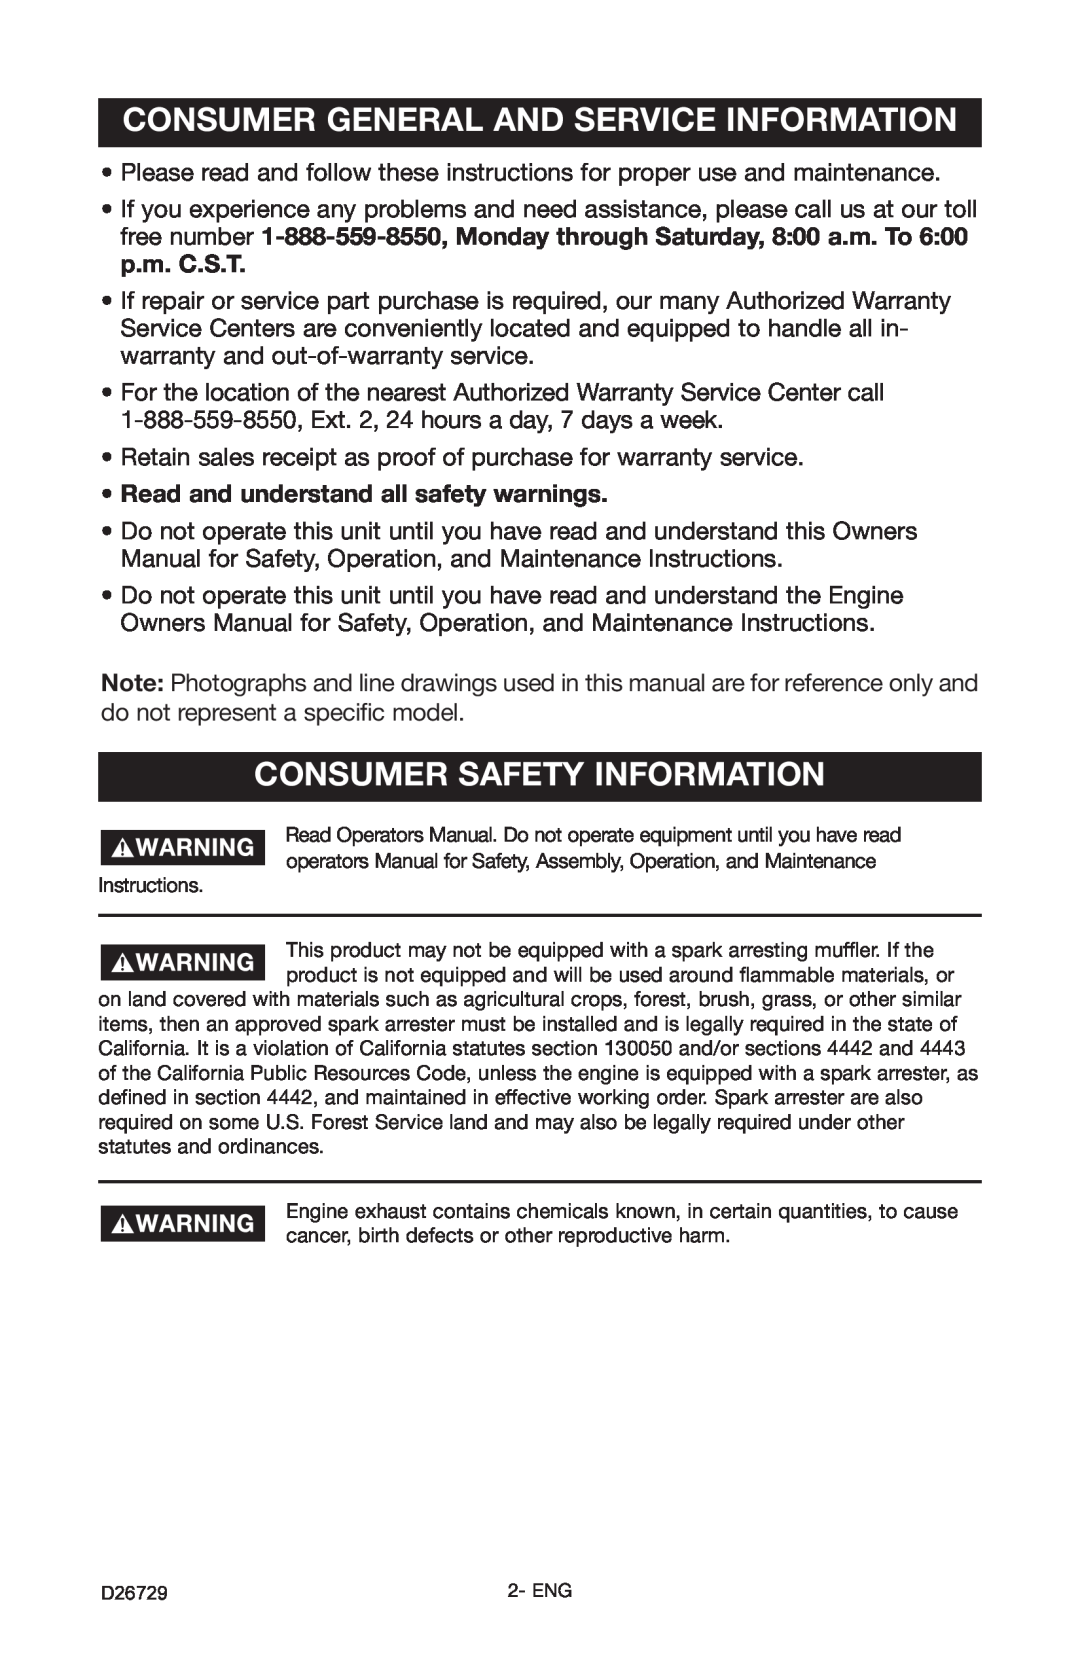 Porter-Cable D26729-028-0 instruction manual Consumer General And Service Information, Consumer Safety Information 